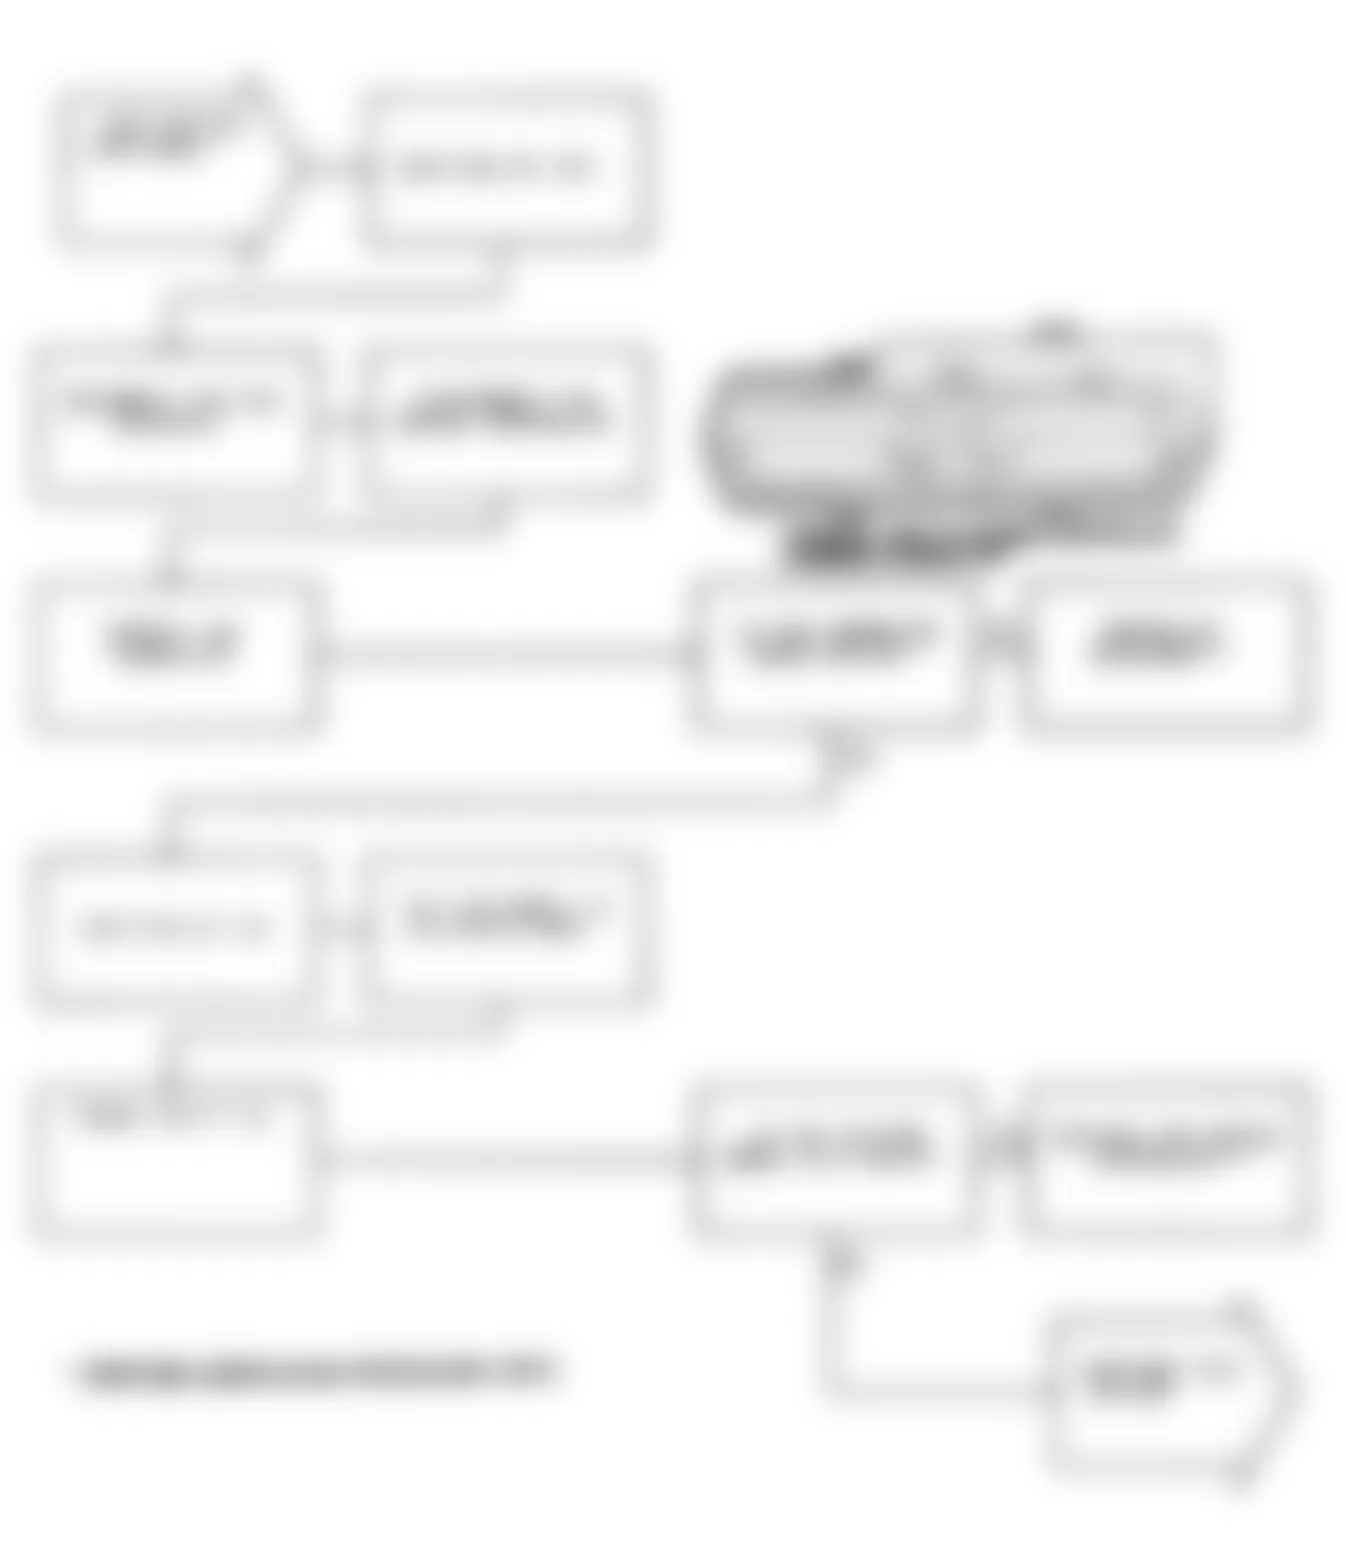 Chrysler Imperial 1991 - Component Locations -  Test DR-22A Code 32: Flowchart (2 of 3)